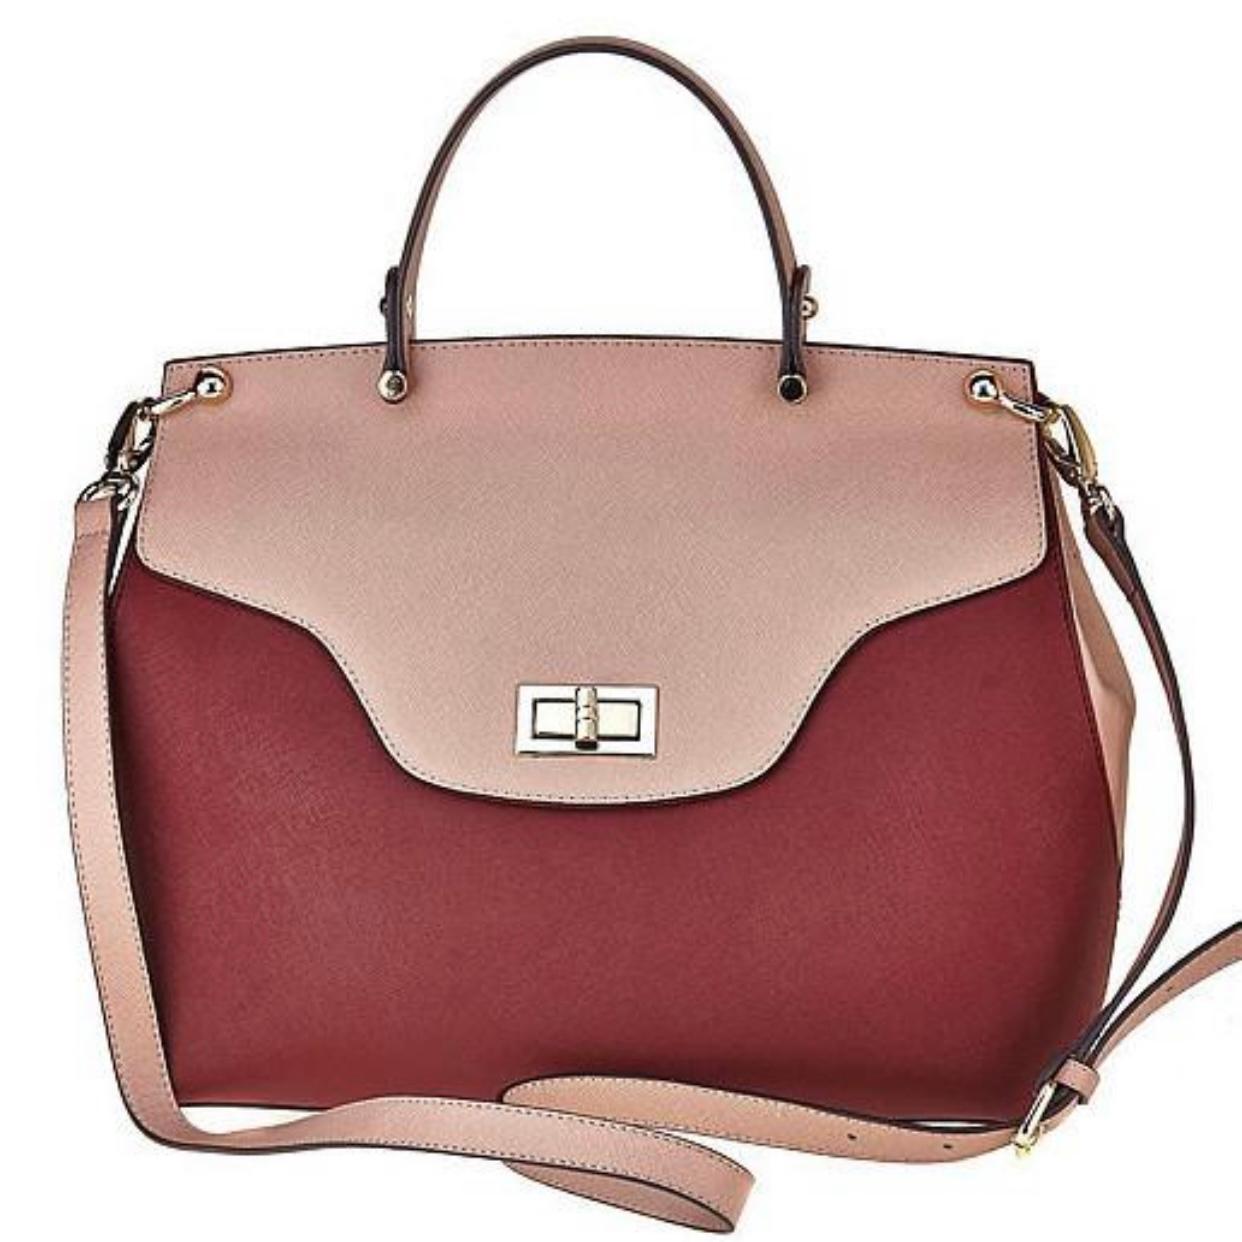 -The Natalia Satchel boasts a modern, refined design. The Blush and Cranberry combination is a sophisticated addition of color to any outfit.
-This romantic grain leather satchel boasts chic and simple gold embellishments and a locking clasp to keep